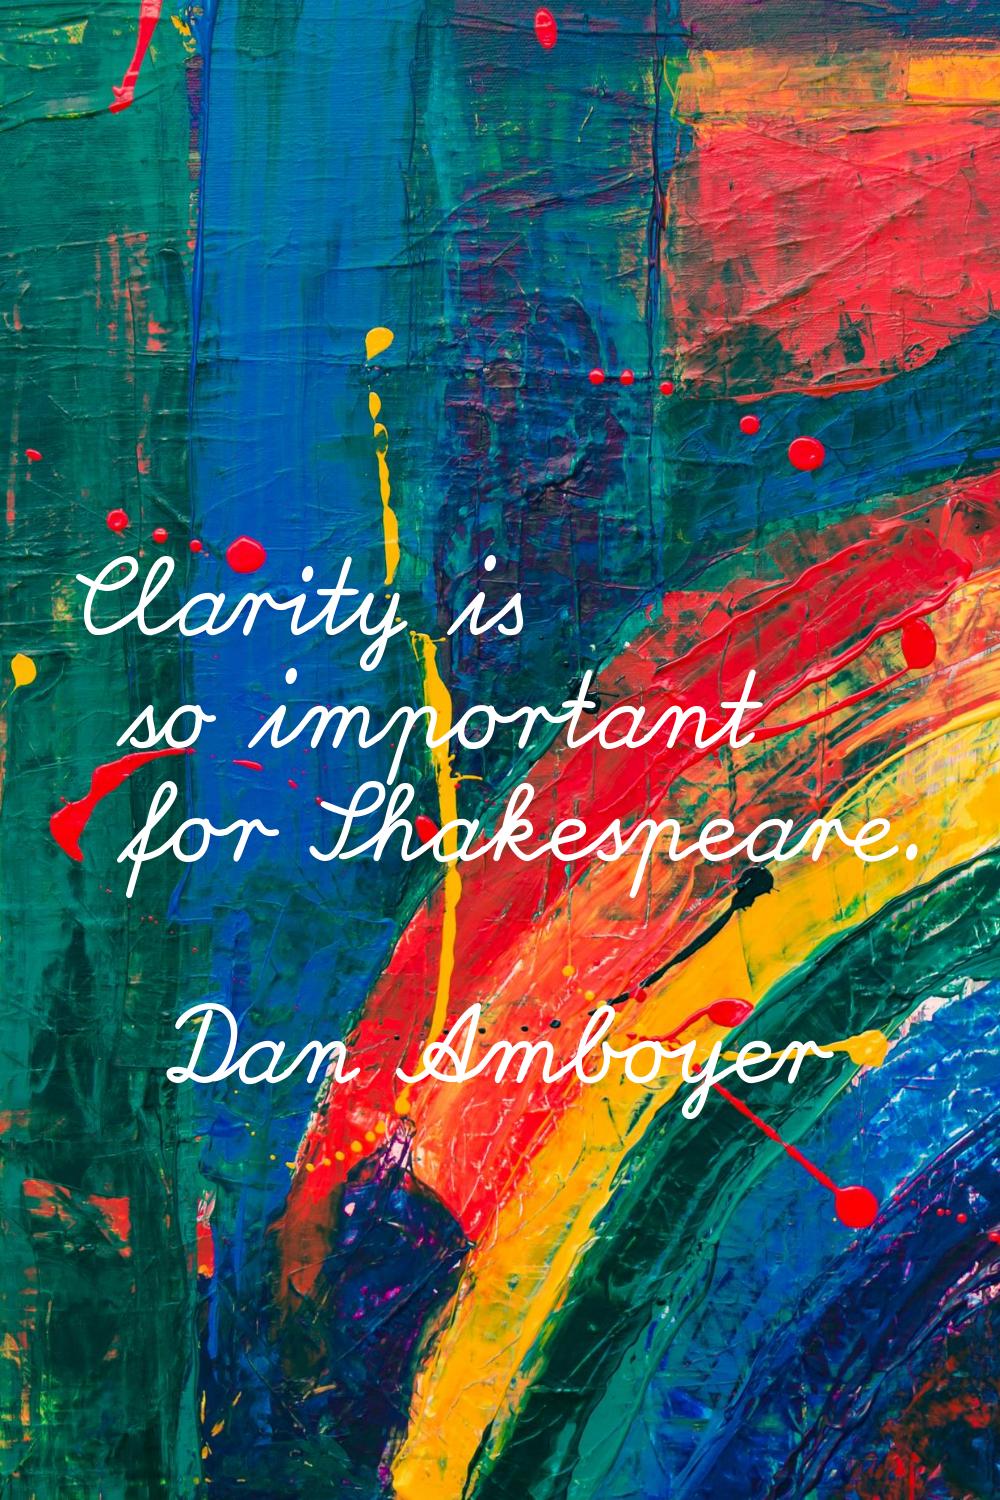 Clarity is so important for Shakespeare.